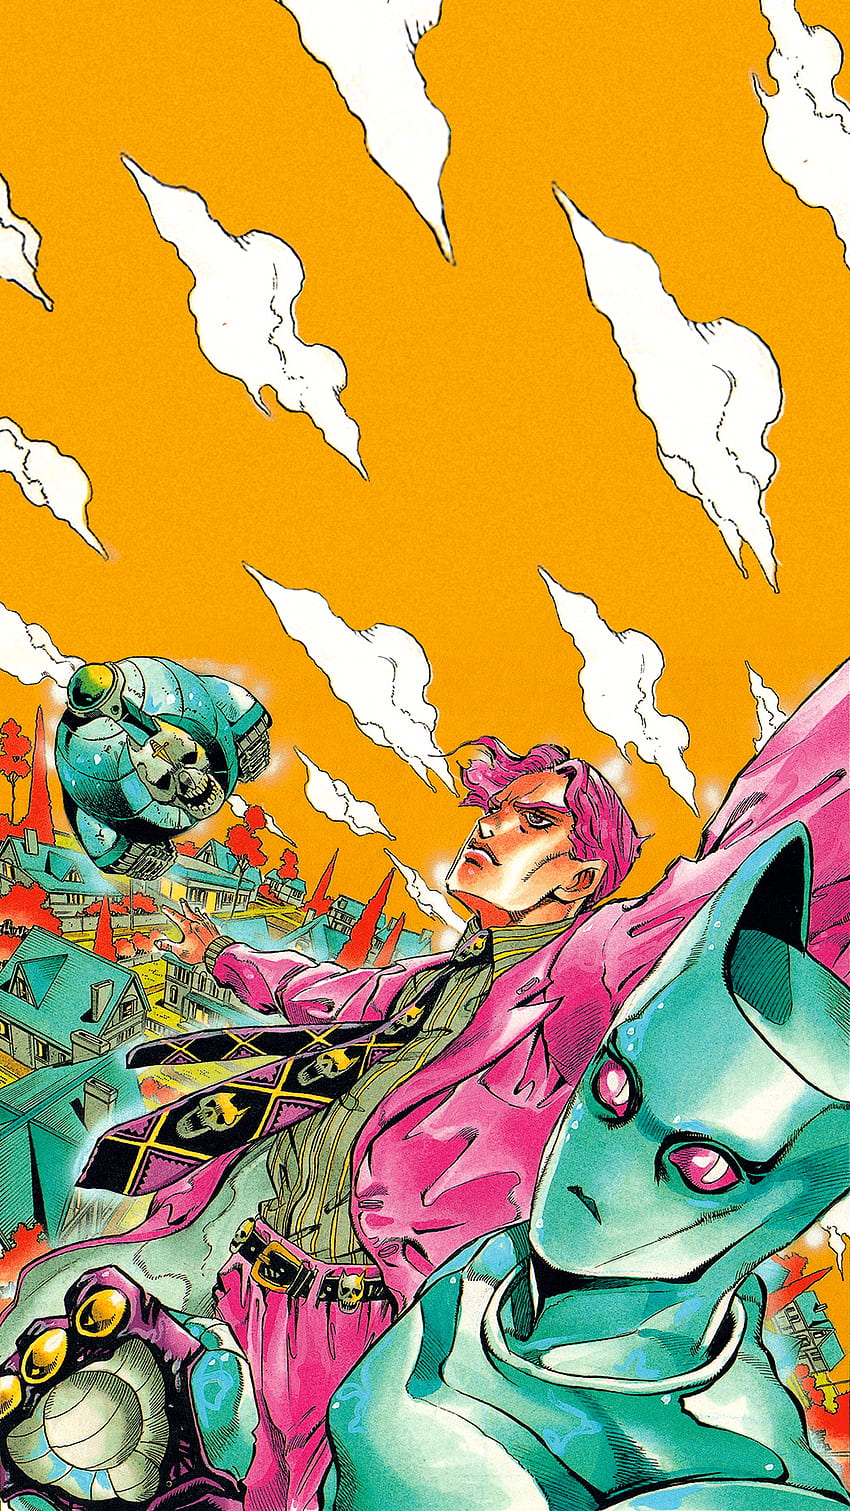 Posting a a day until stone ocean is animated day 70: Kira and Killer Queen : JoJo HD phone wallpaper